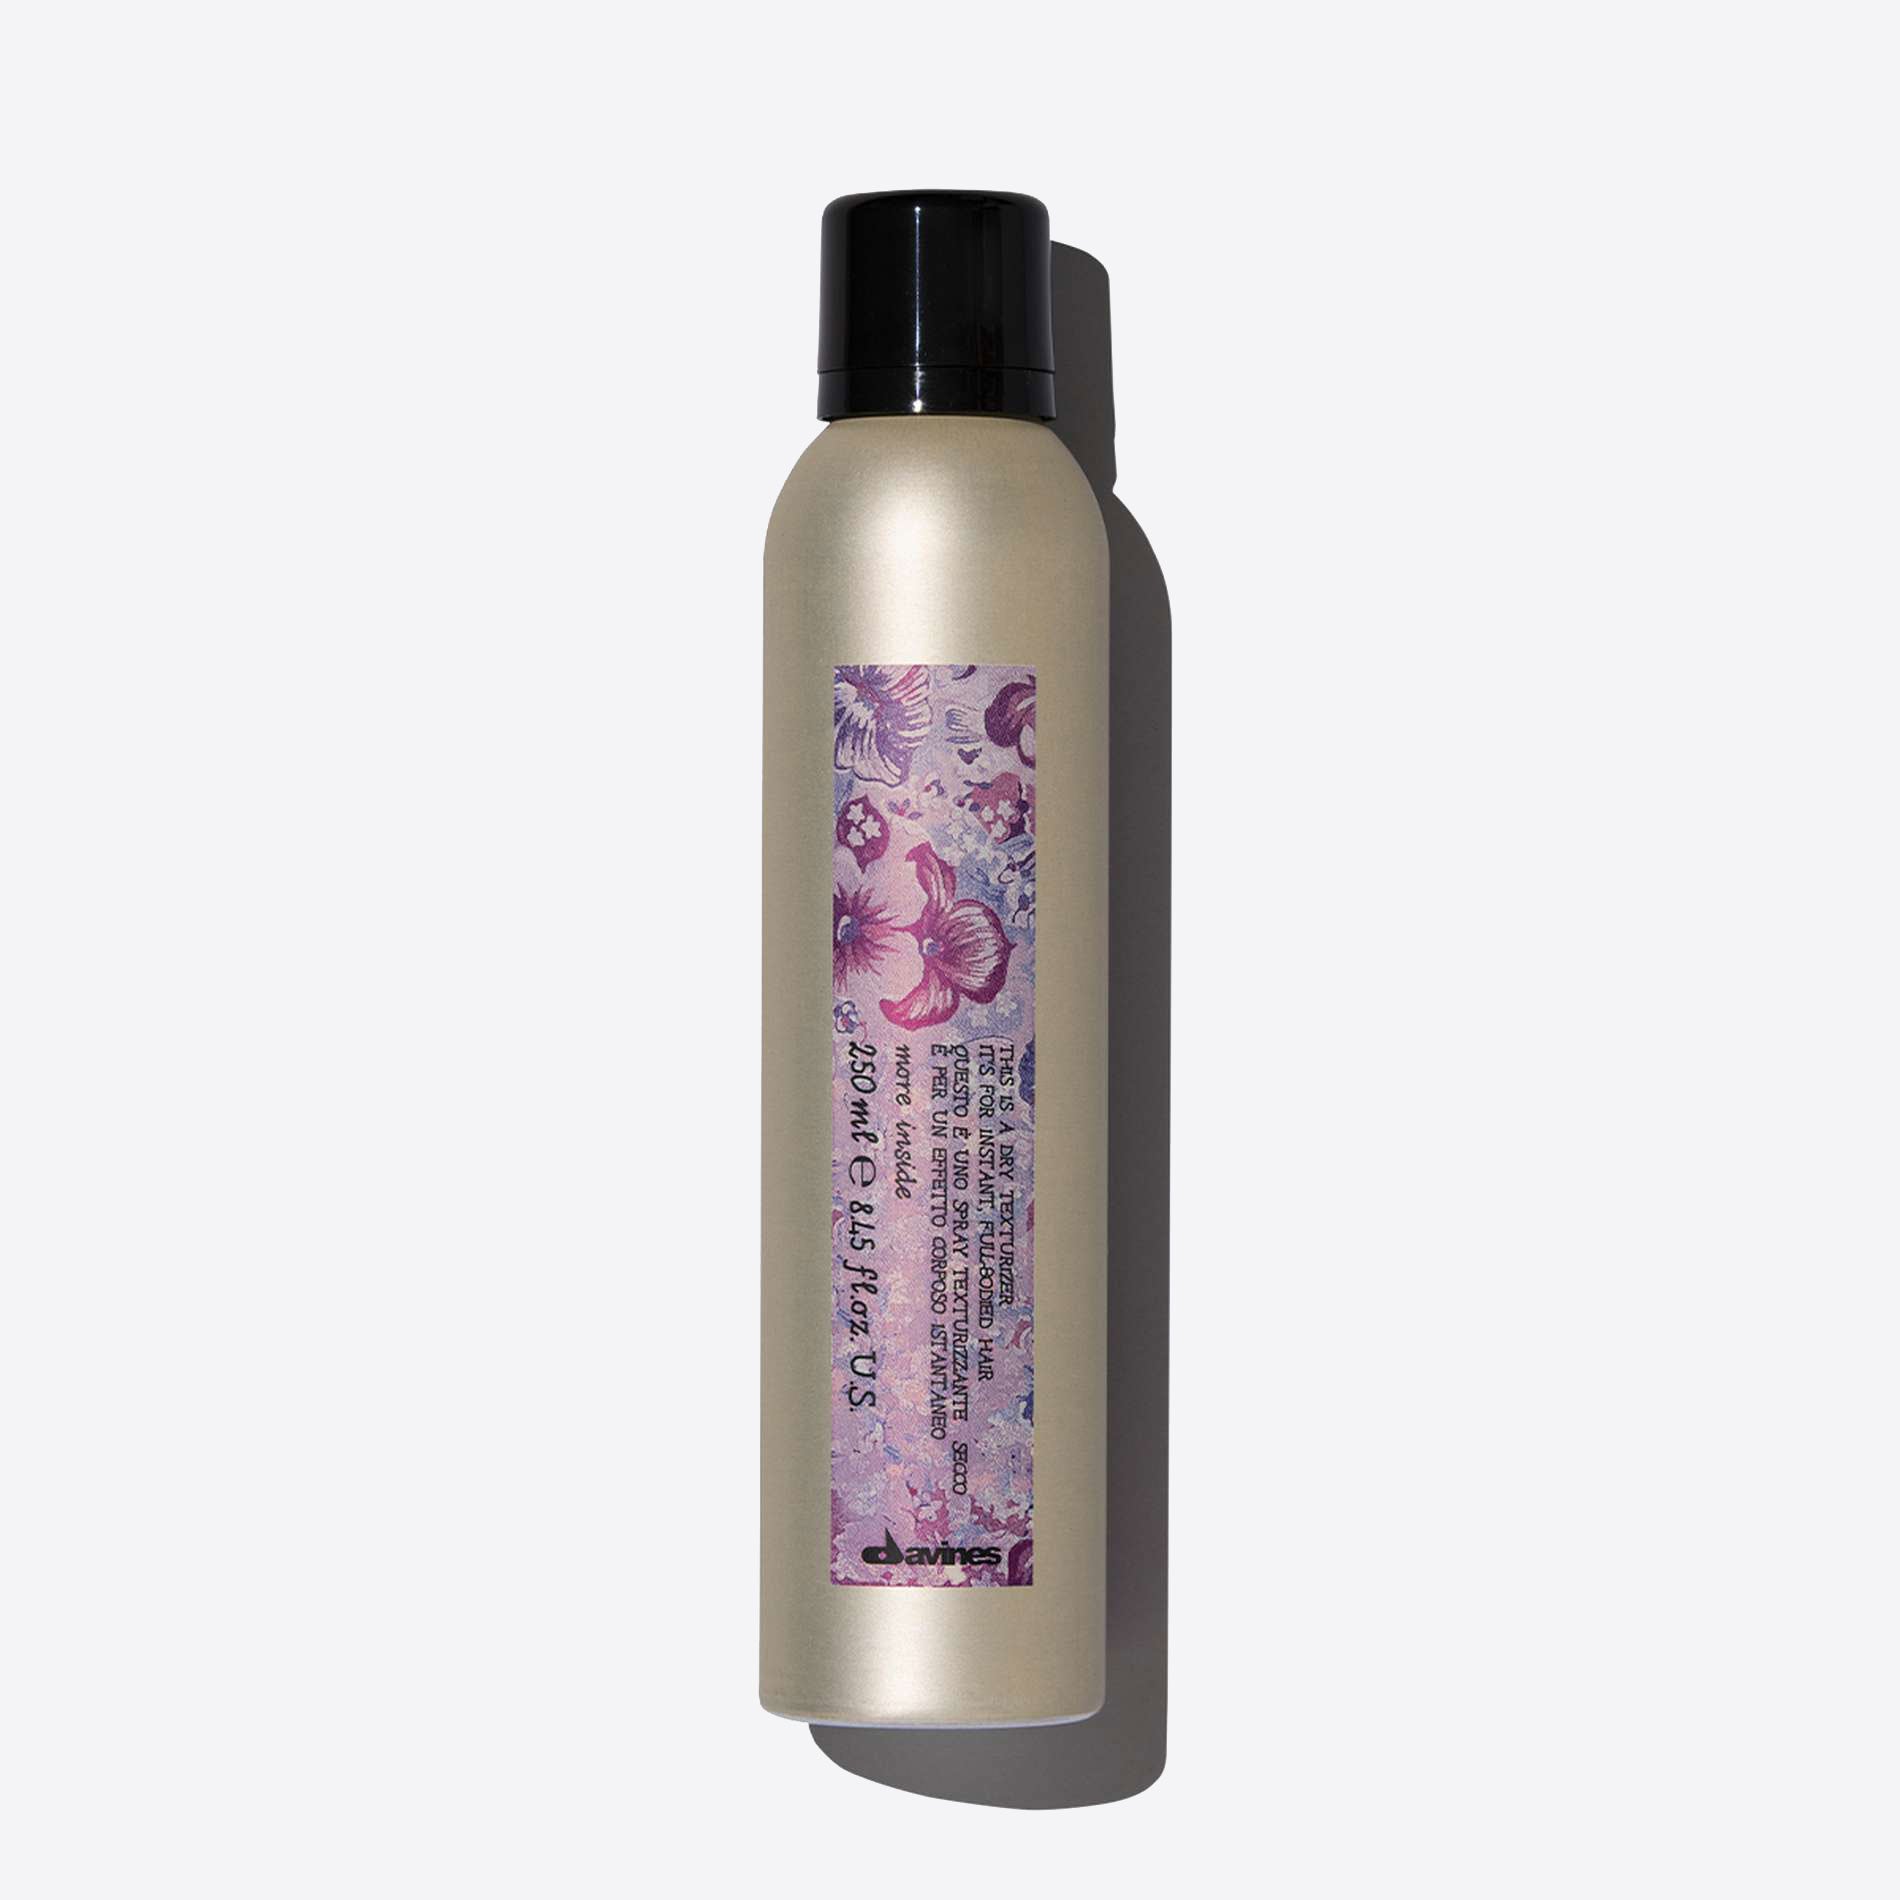 This is a Dry Texturizer texturizing and volumizing spray